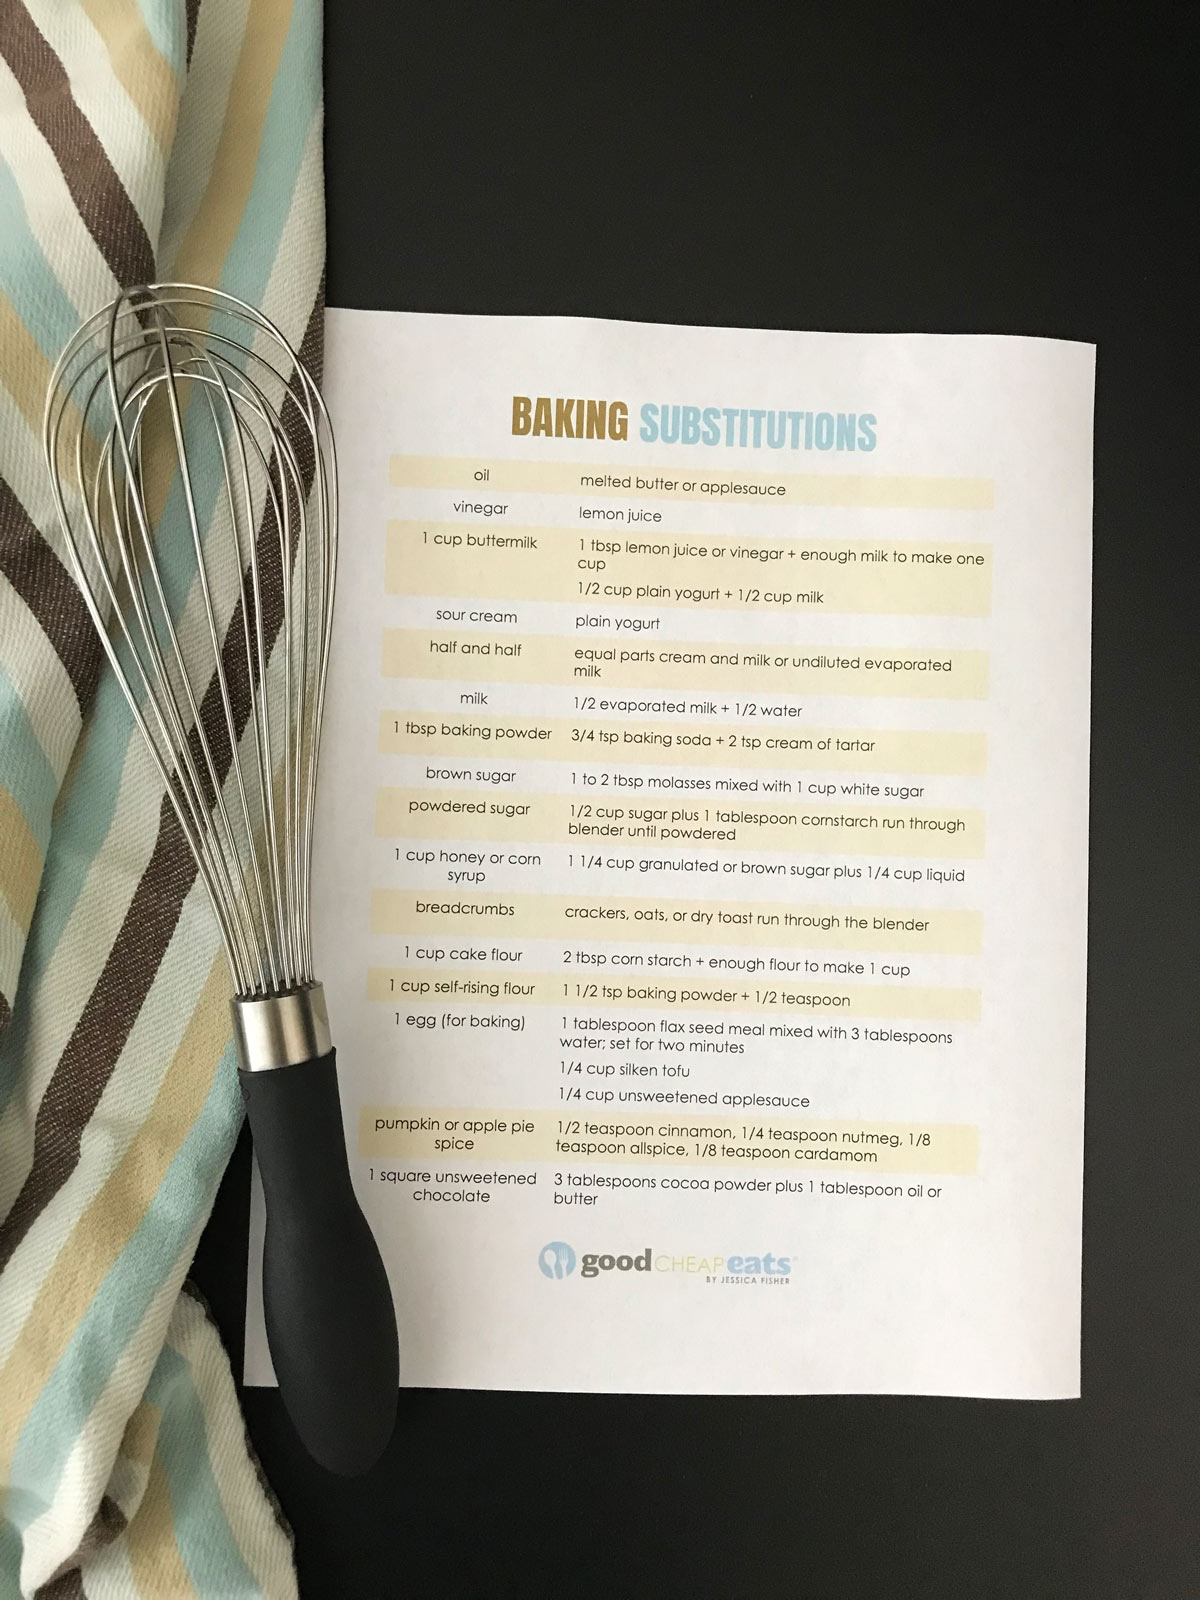 printed list of baking substitutions on black table top with whisk and kitchen towel.